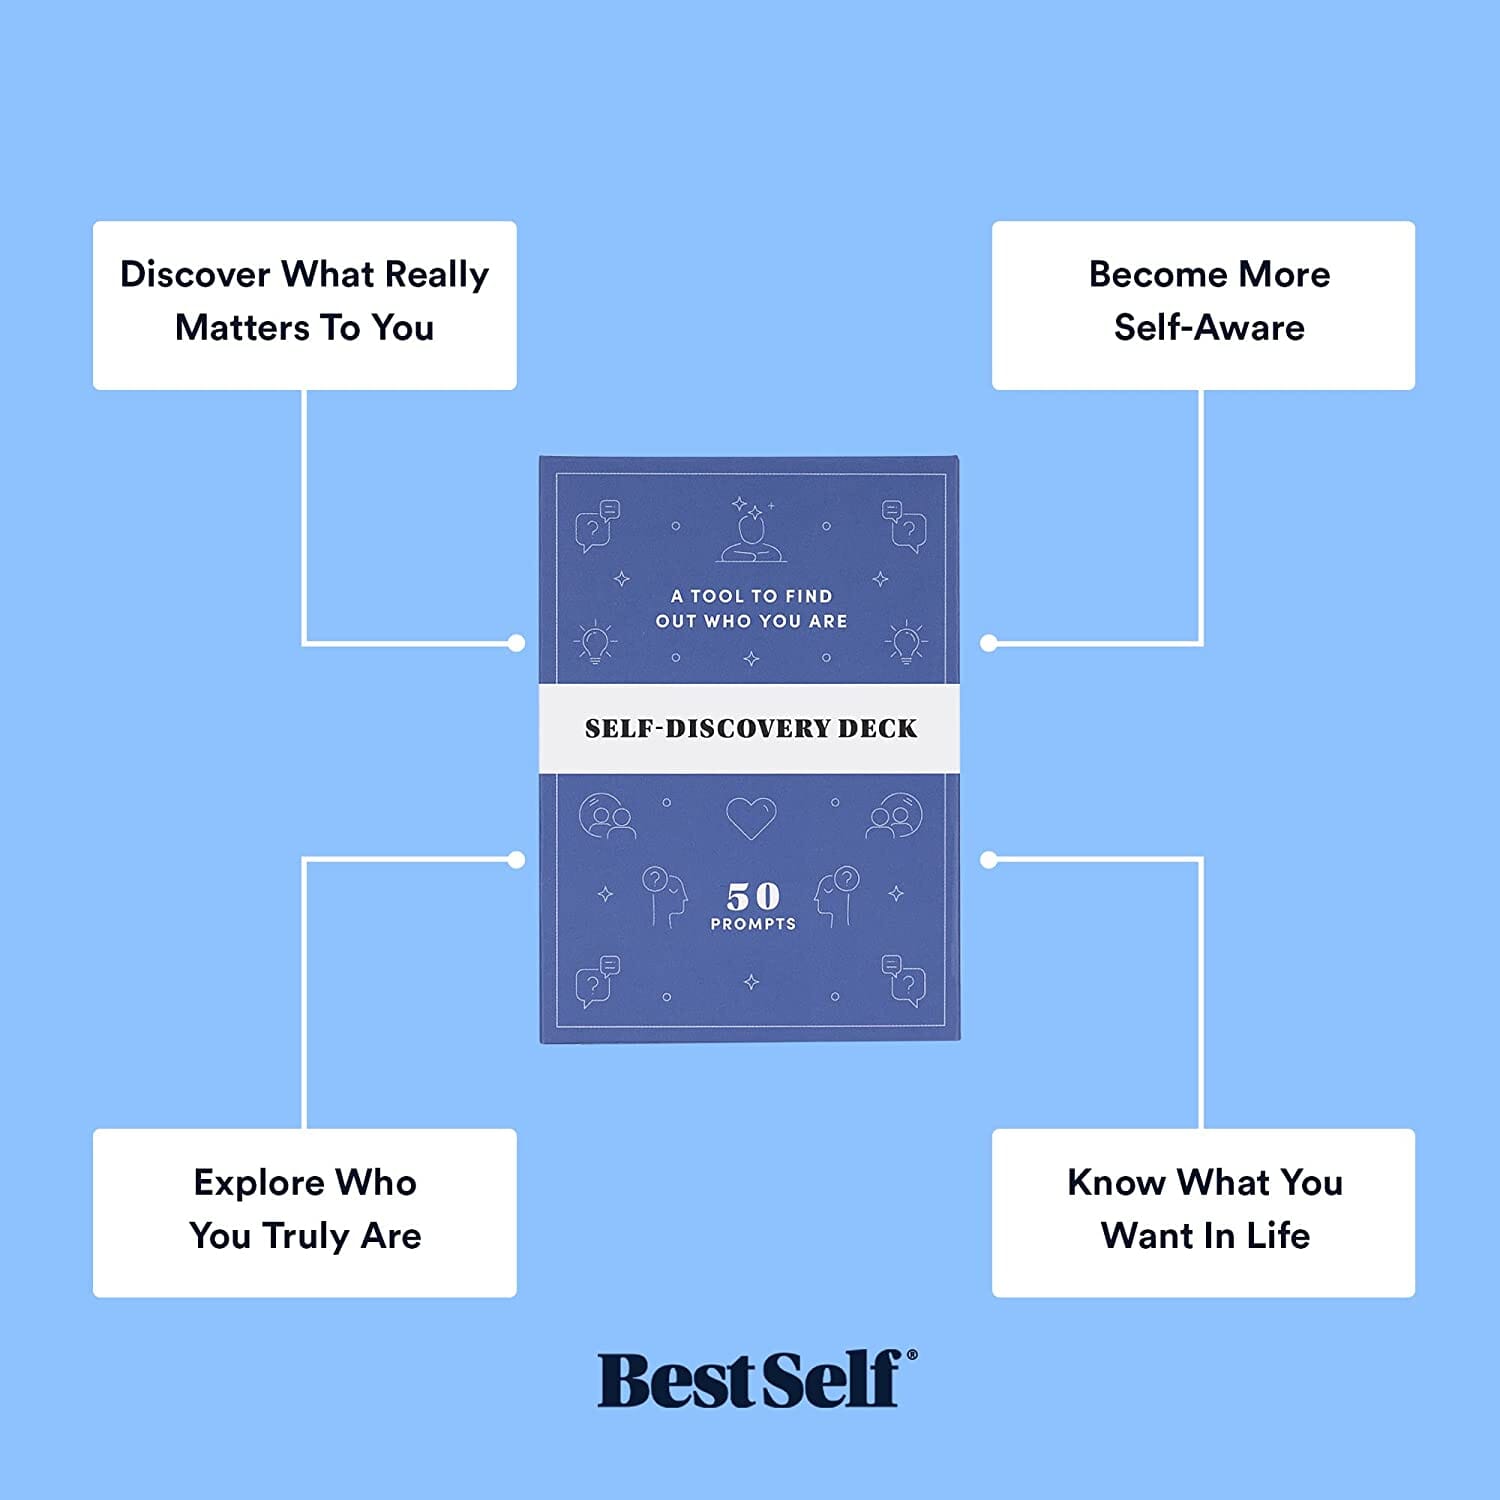 Self-Discovery Deck Card Deck Personal Growth